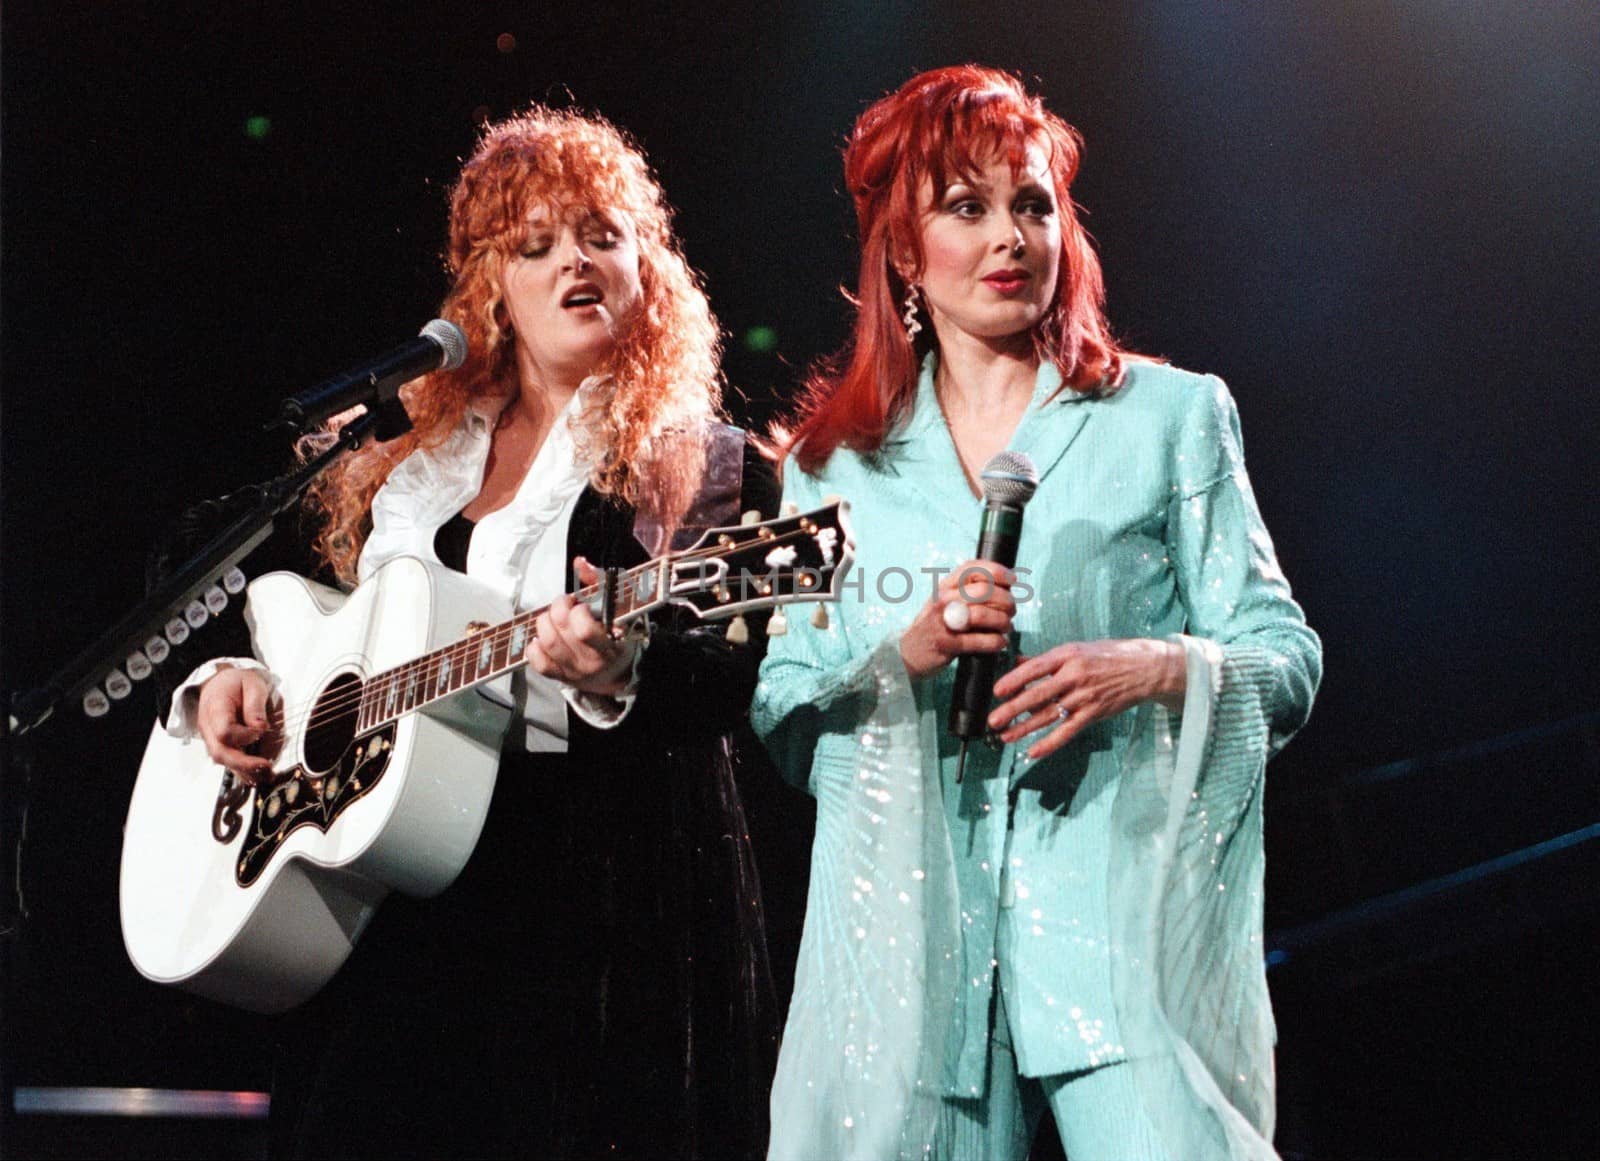 Wynona and Naomi Judd in concert at the Anaheim Pond, 03-02-00